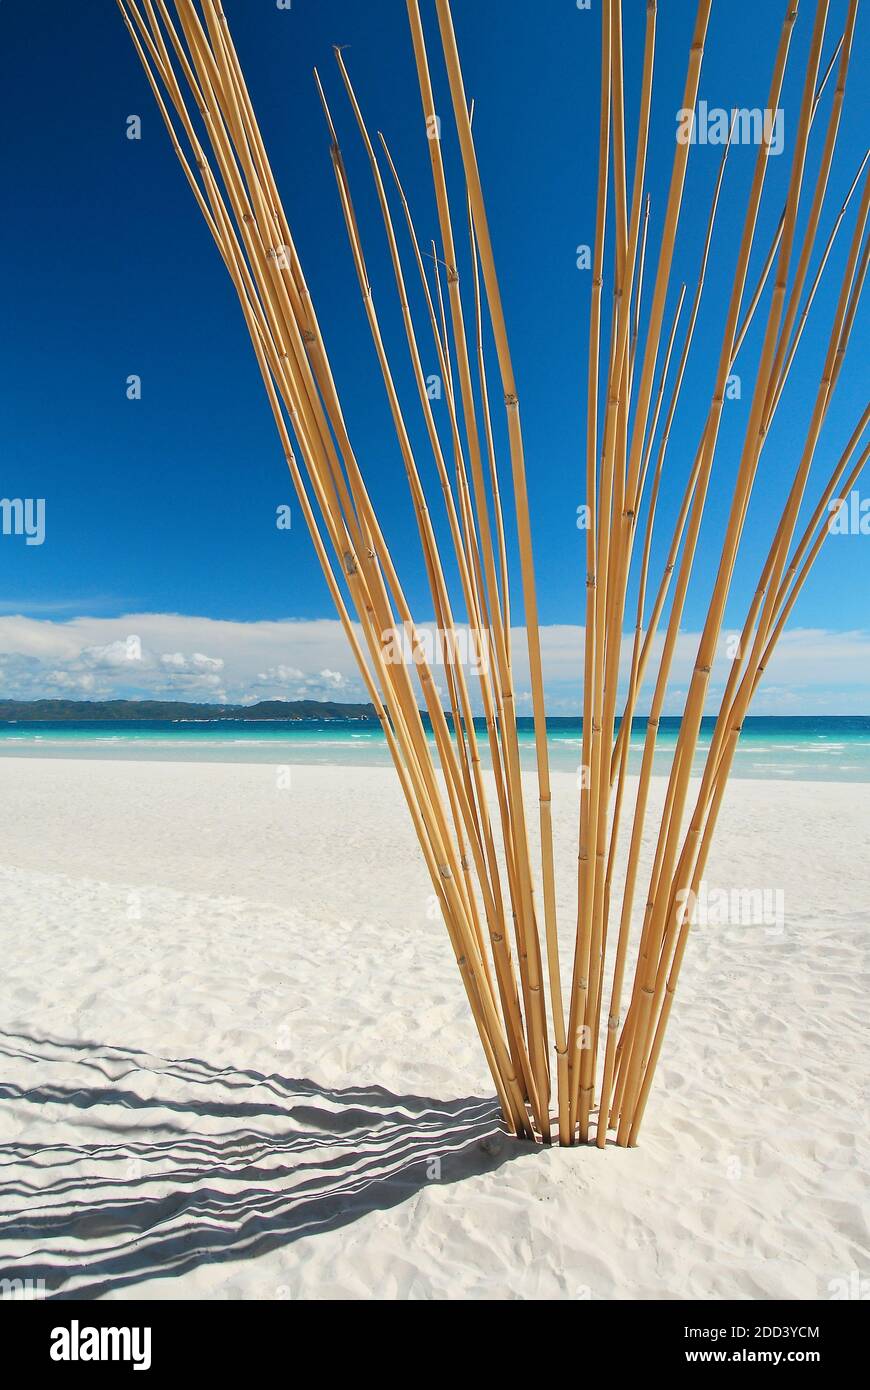 Beautiful clean empty sandy White Beach with bamboo artwork against a blue sky on Boracay Island, Aklan Province, Visayas, Philippines, Asia Stock Photo